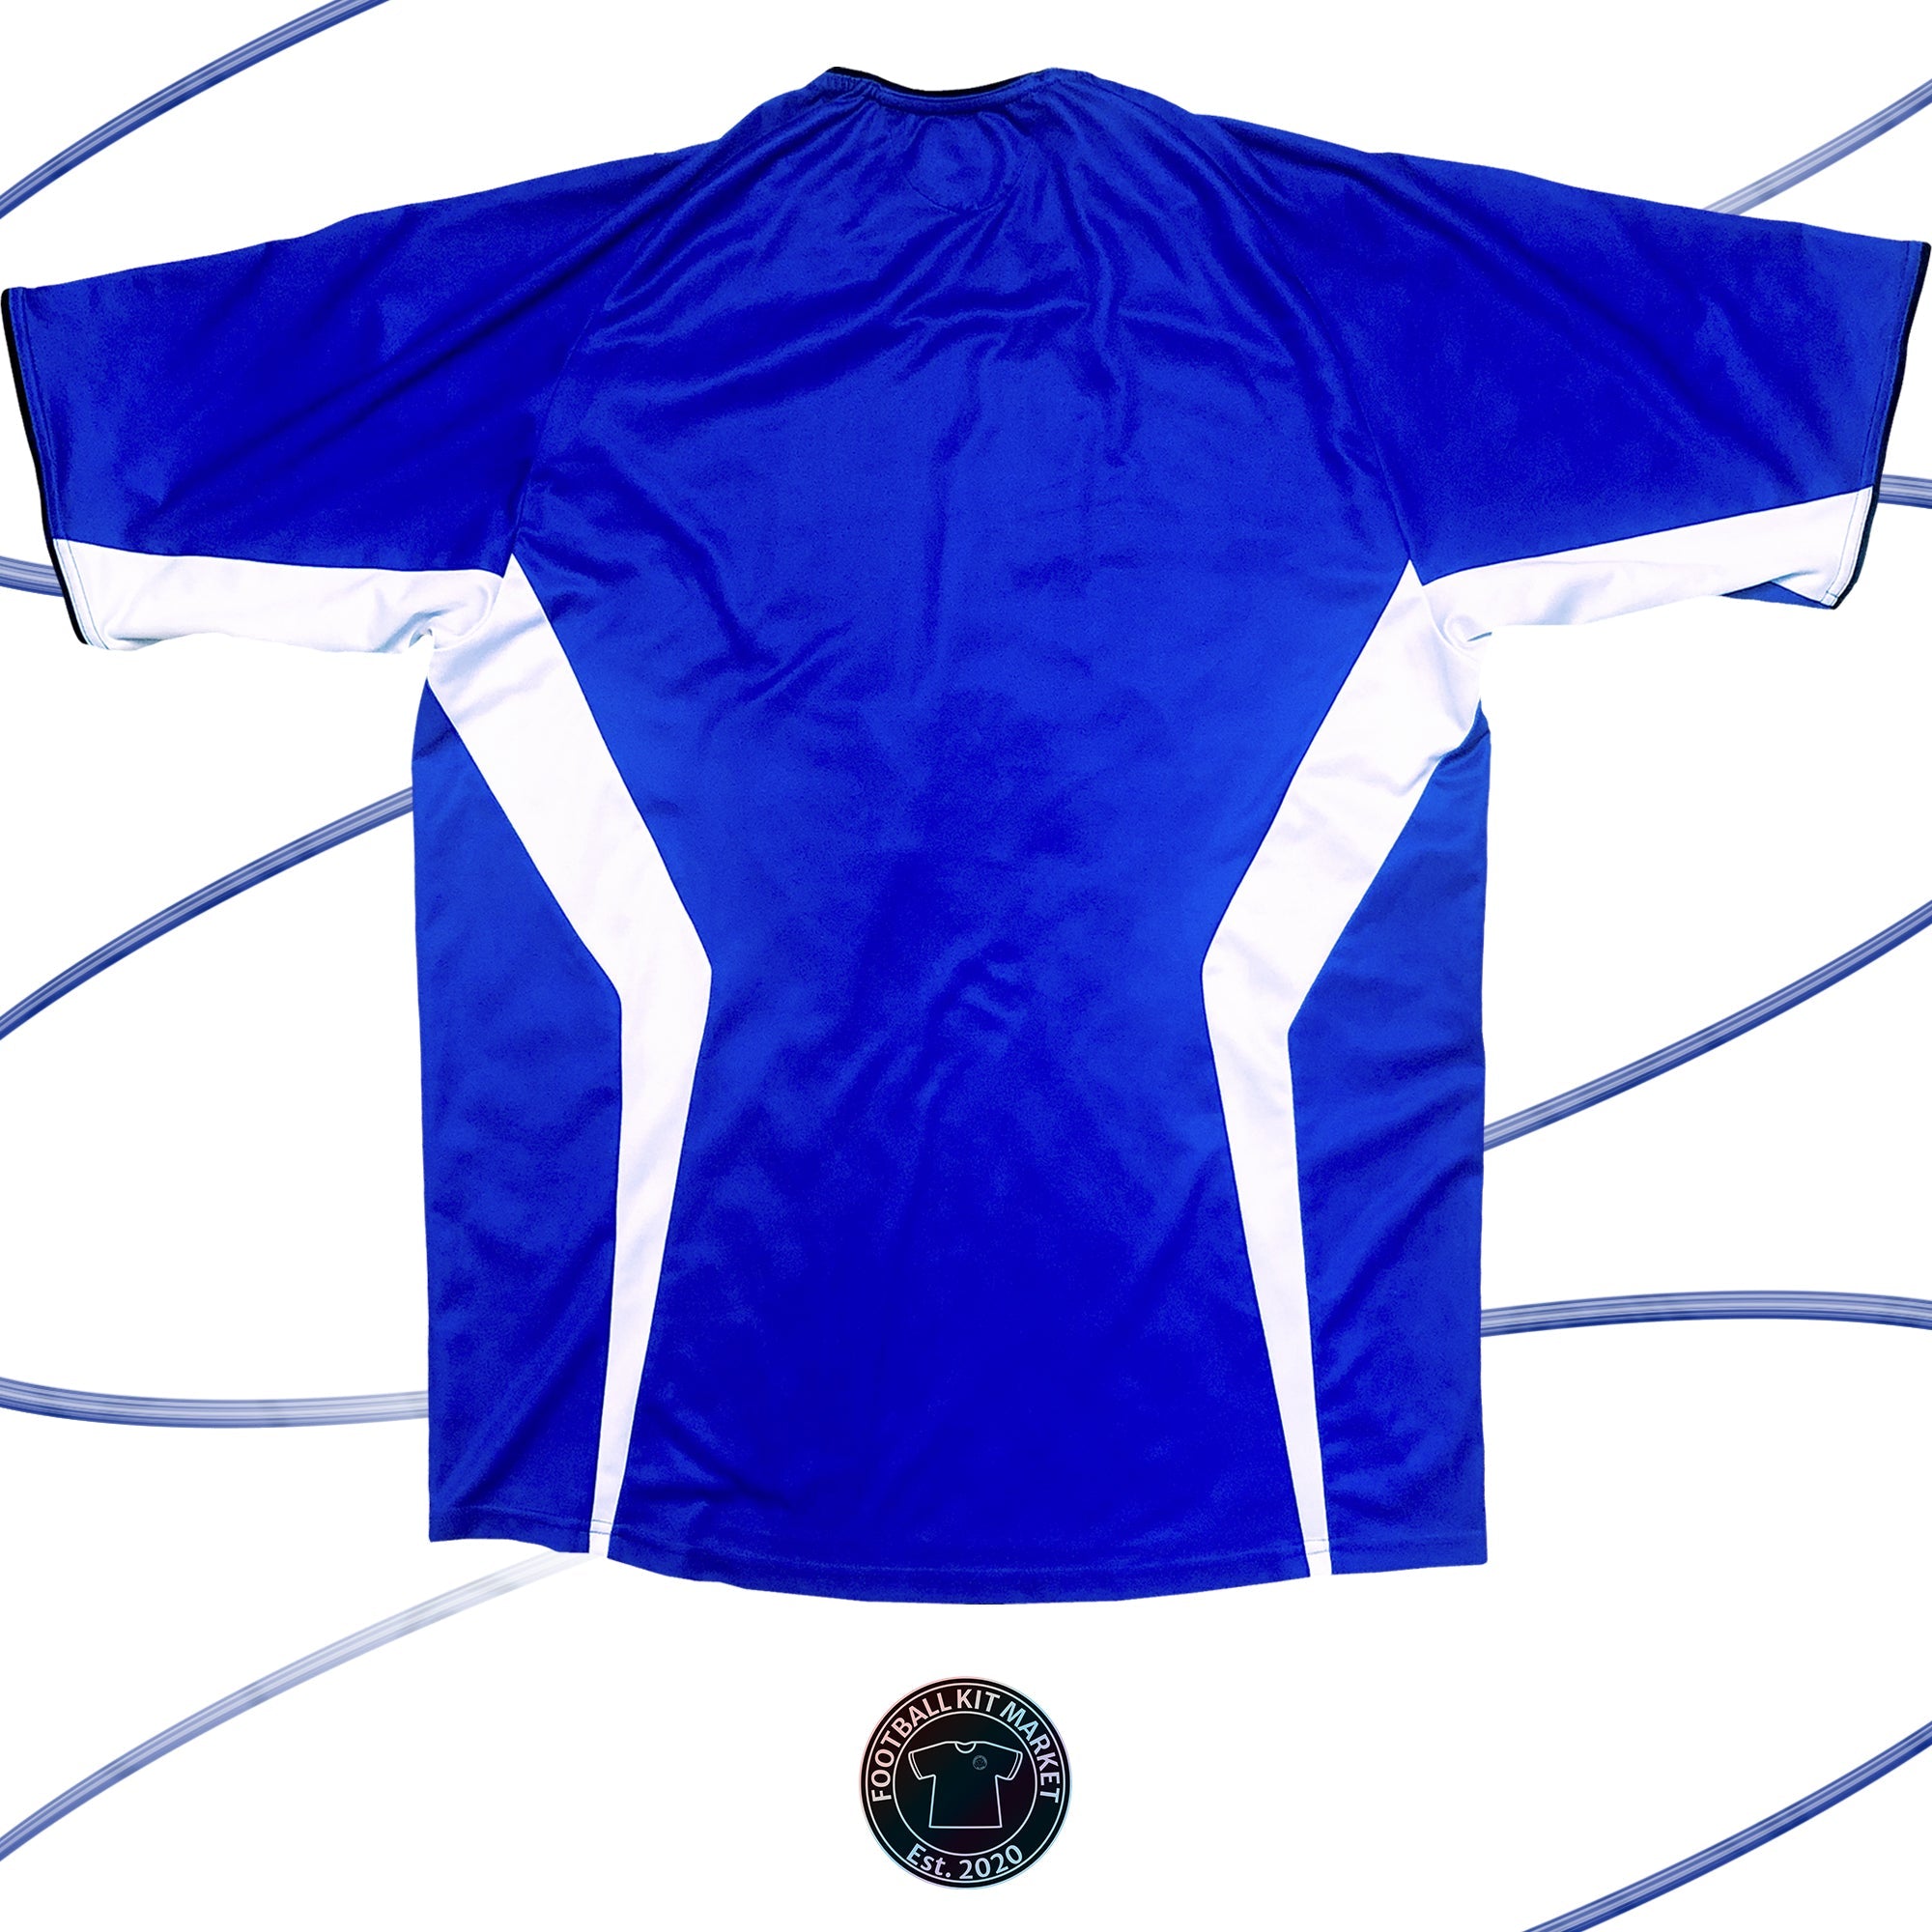 Genuine SHEFFIELD WEDNESDAY Home (2003-2005) - DIADORA (XL) - Product Image from Football Kit Market